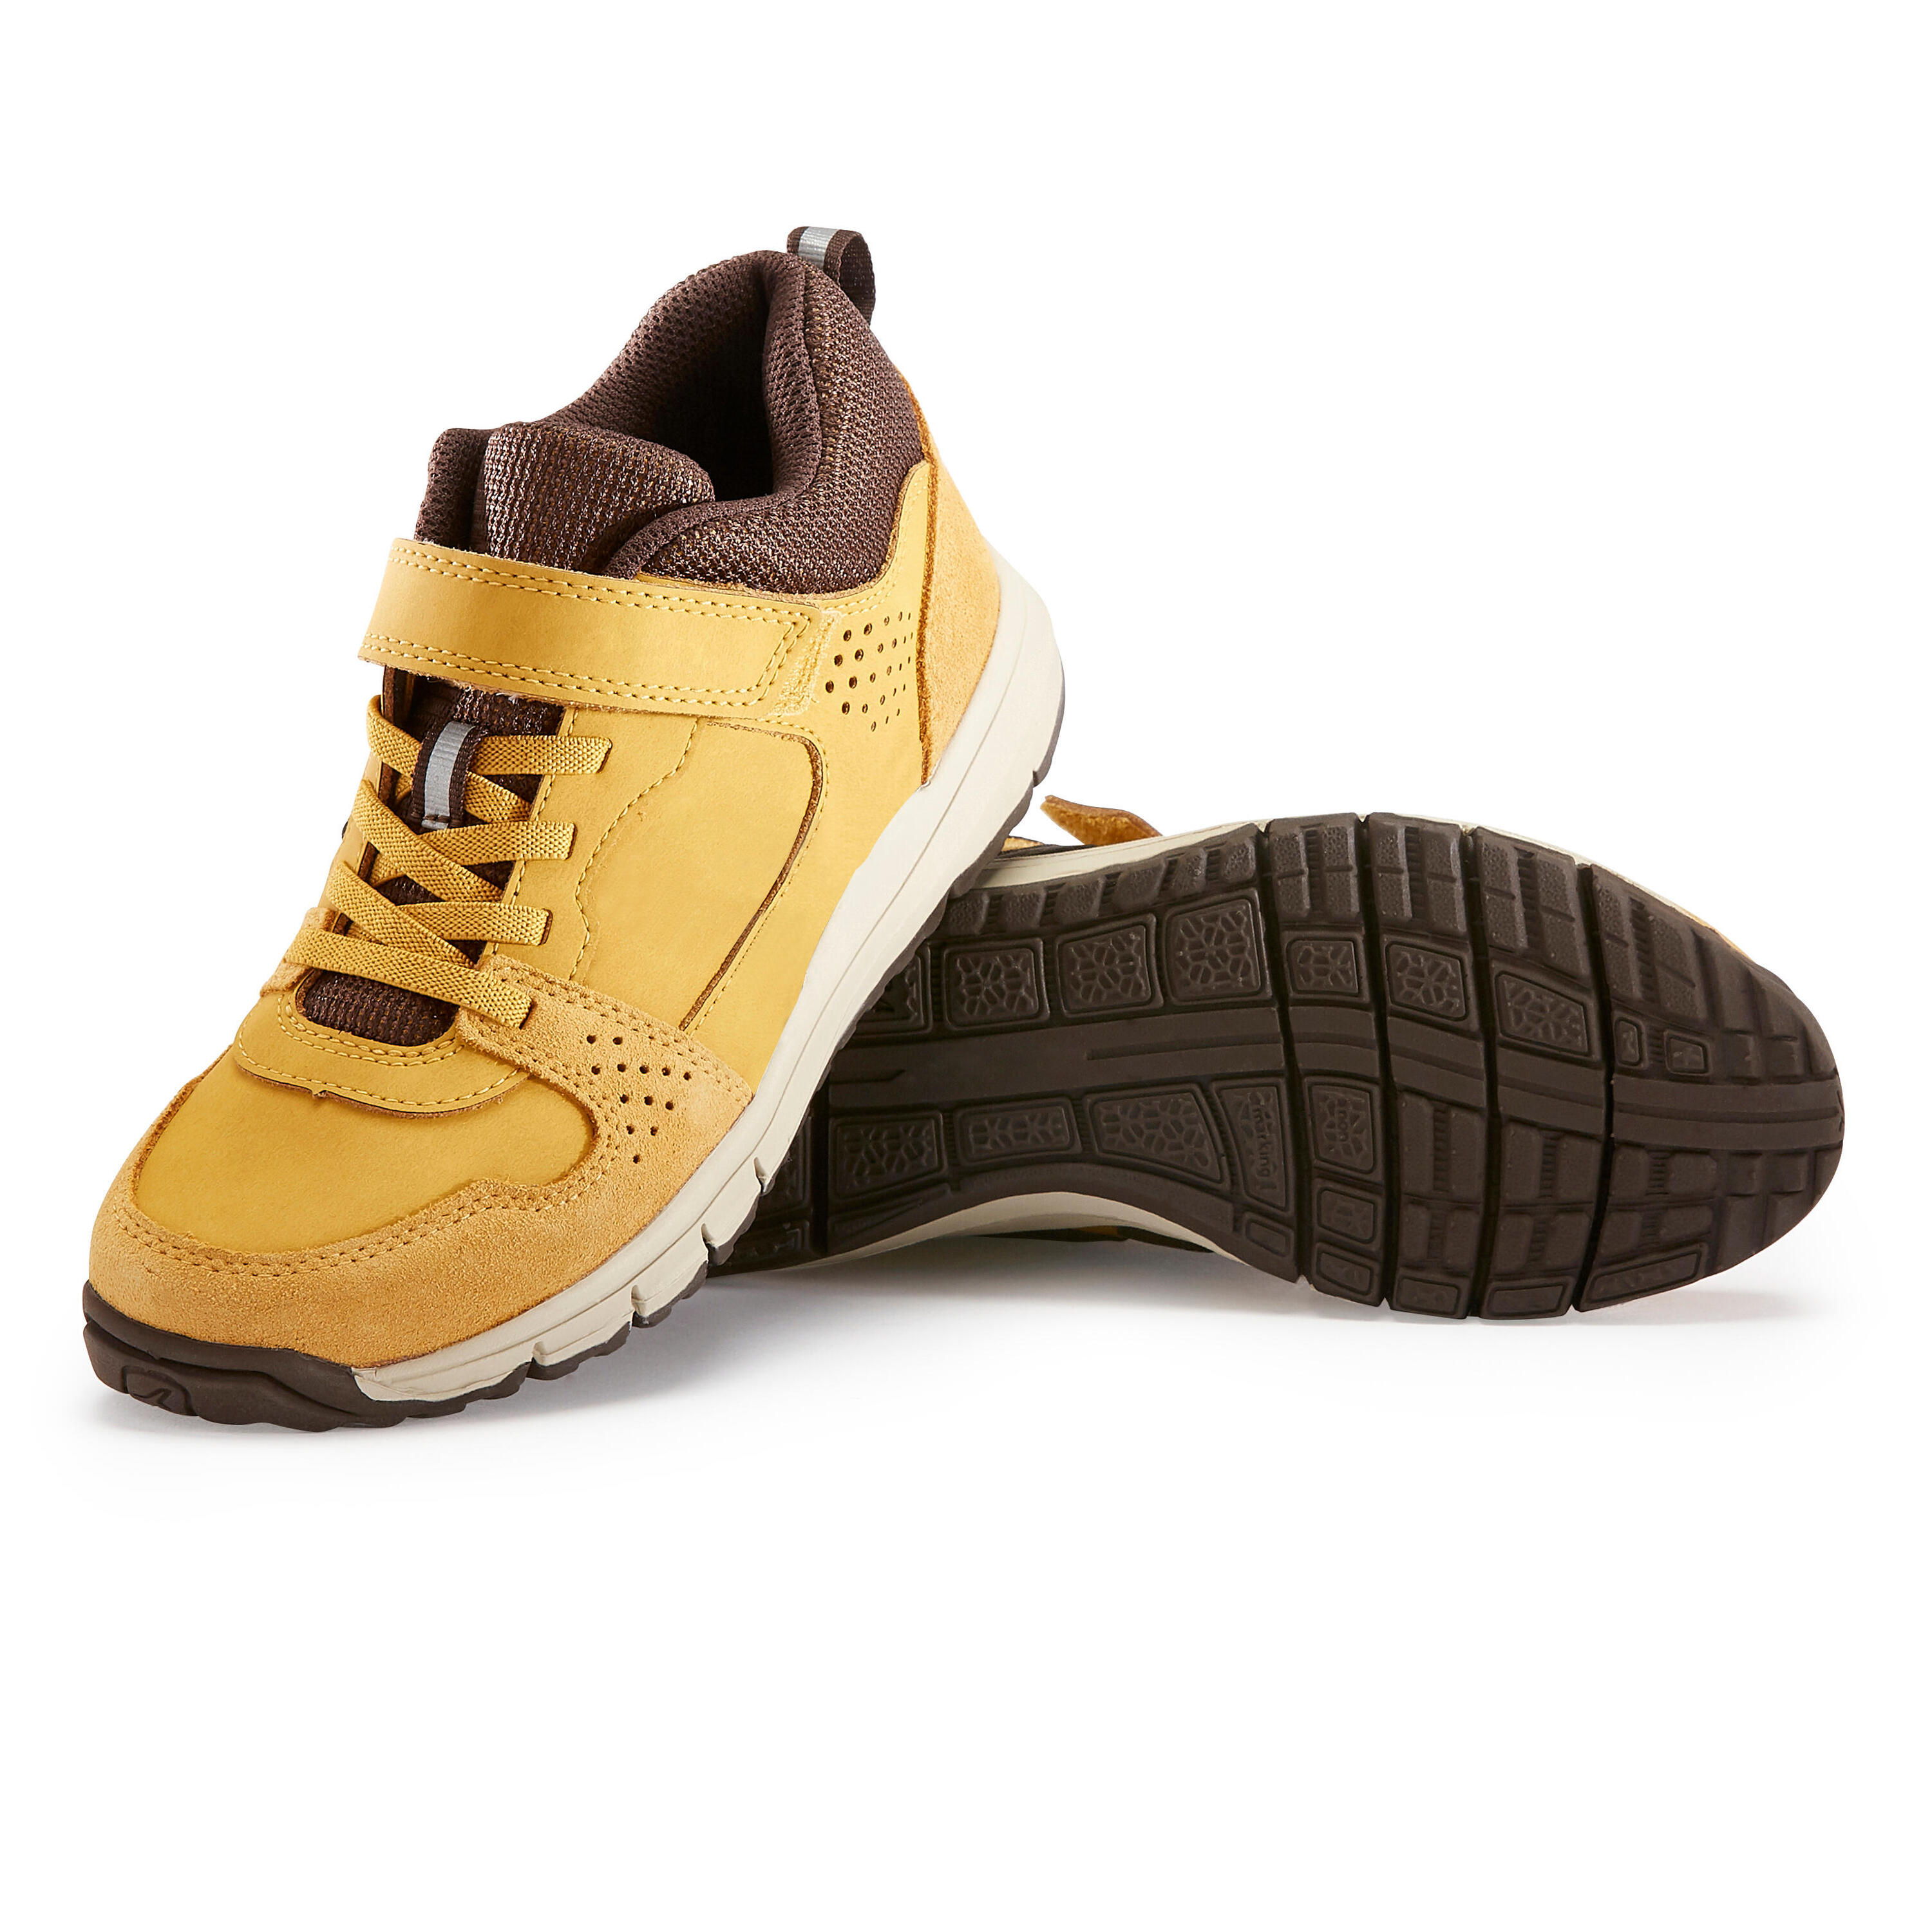 Kids' Rip-Tab Leather Shoes Protect 560 6/18